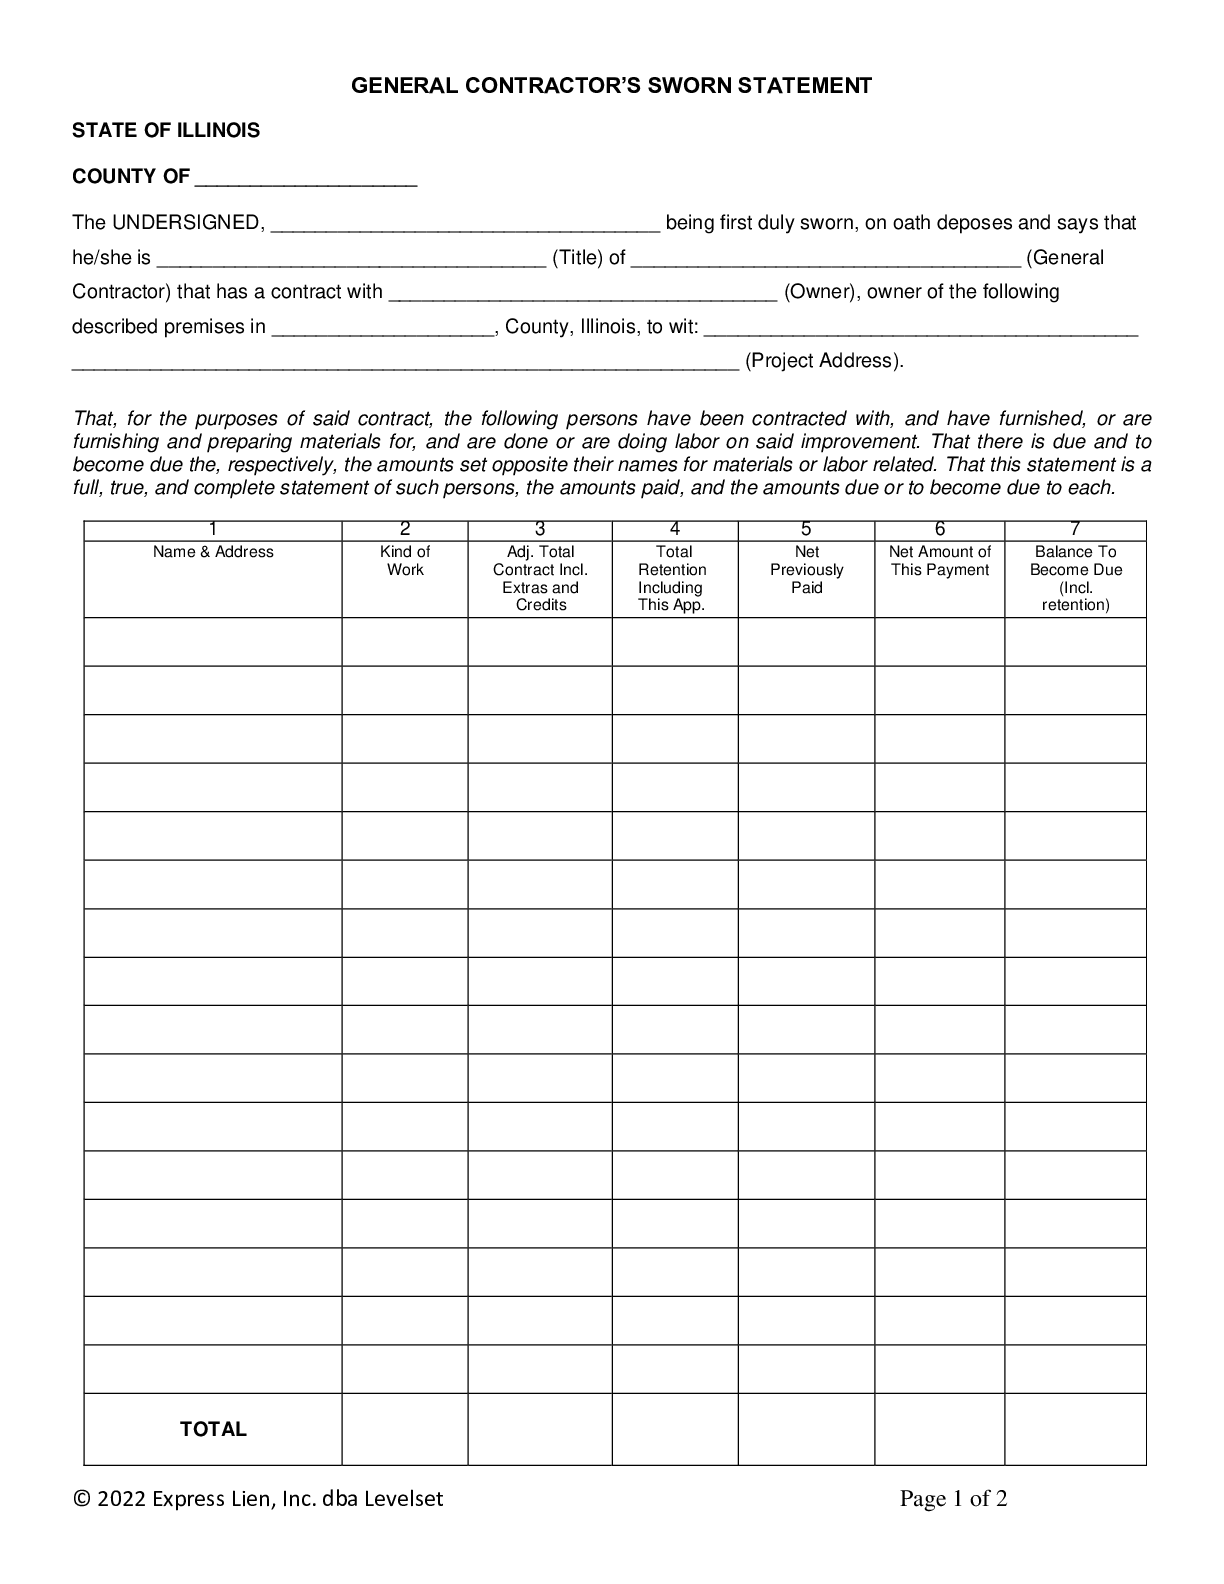 Illinois General Contractor’s Sworn Statement Form - free from